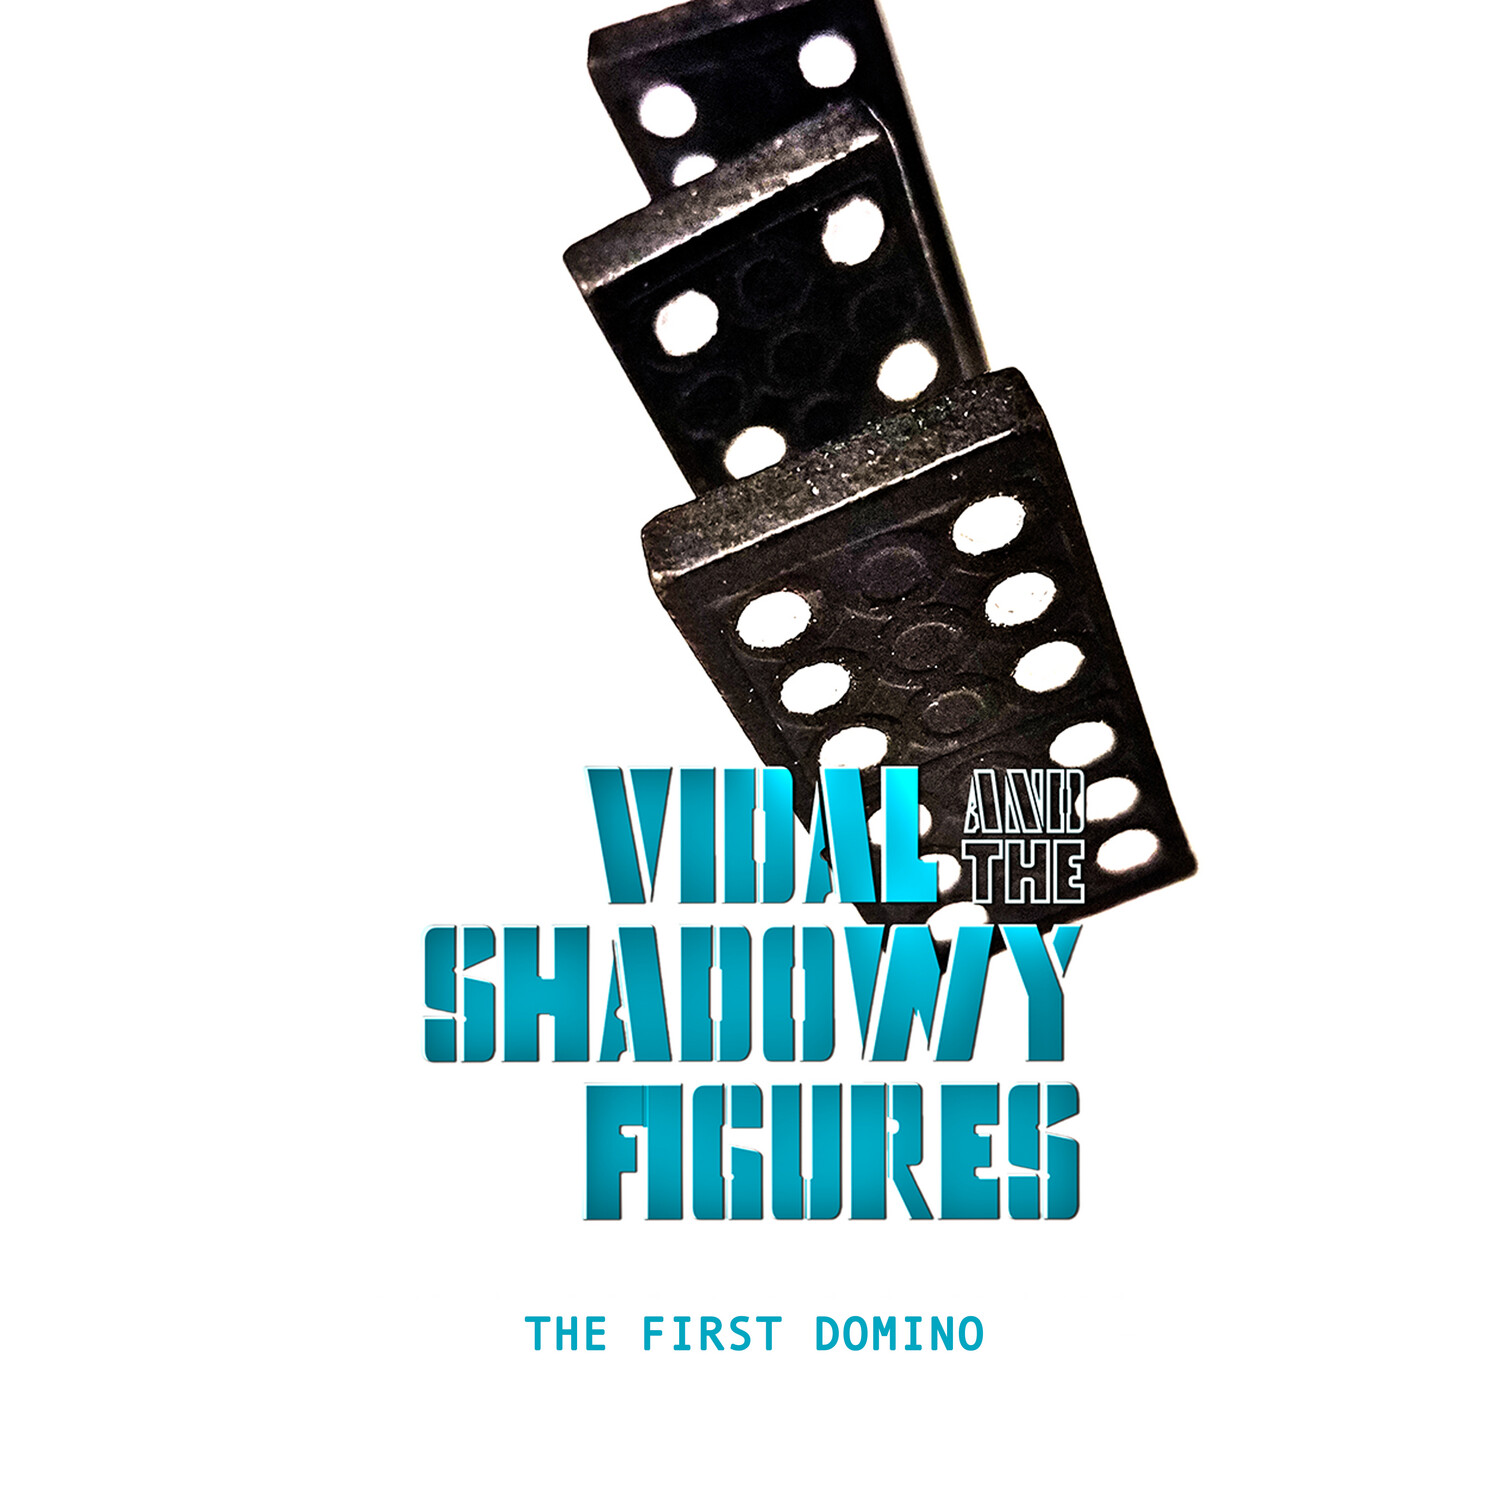 The First Domino